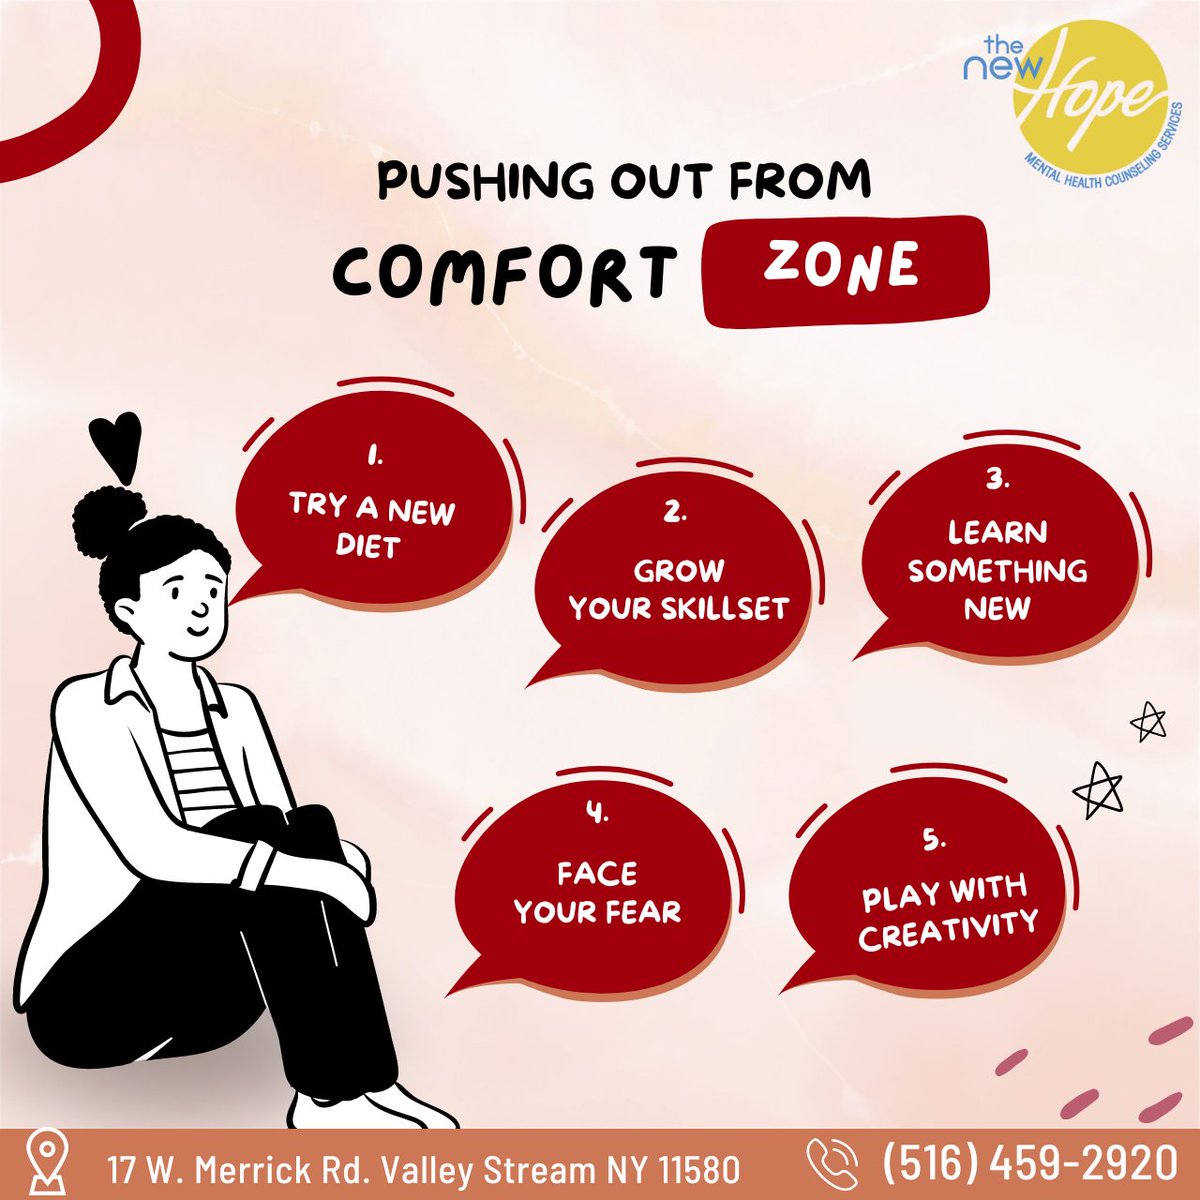 Step out of your comfort zone and unlock endless possibilities

#lowselfworth #insecurities #multiculturalcounseling #mentalmealthtips #mentalhealth #mentalhealthservices #mentalhealthhelp #Thenewhopemhcs  #mentalhealthcounseling #mentalhealththerapist #mentalhealthcounselor